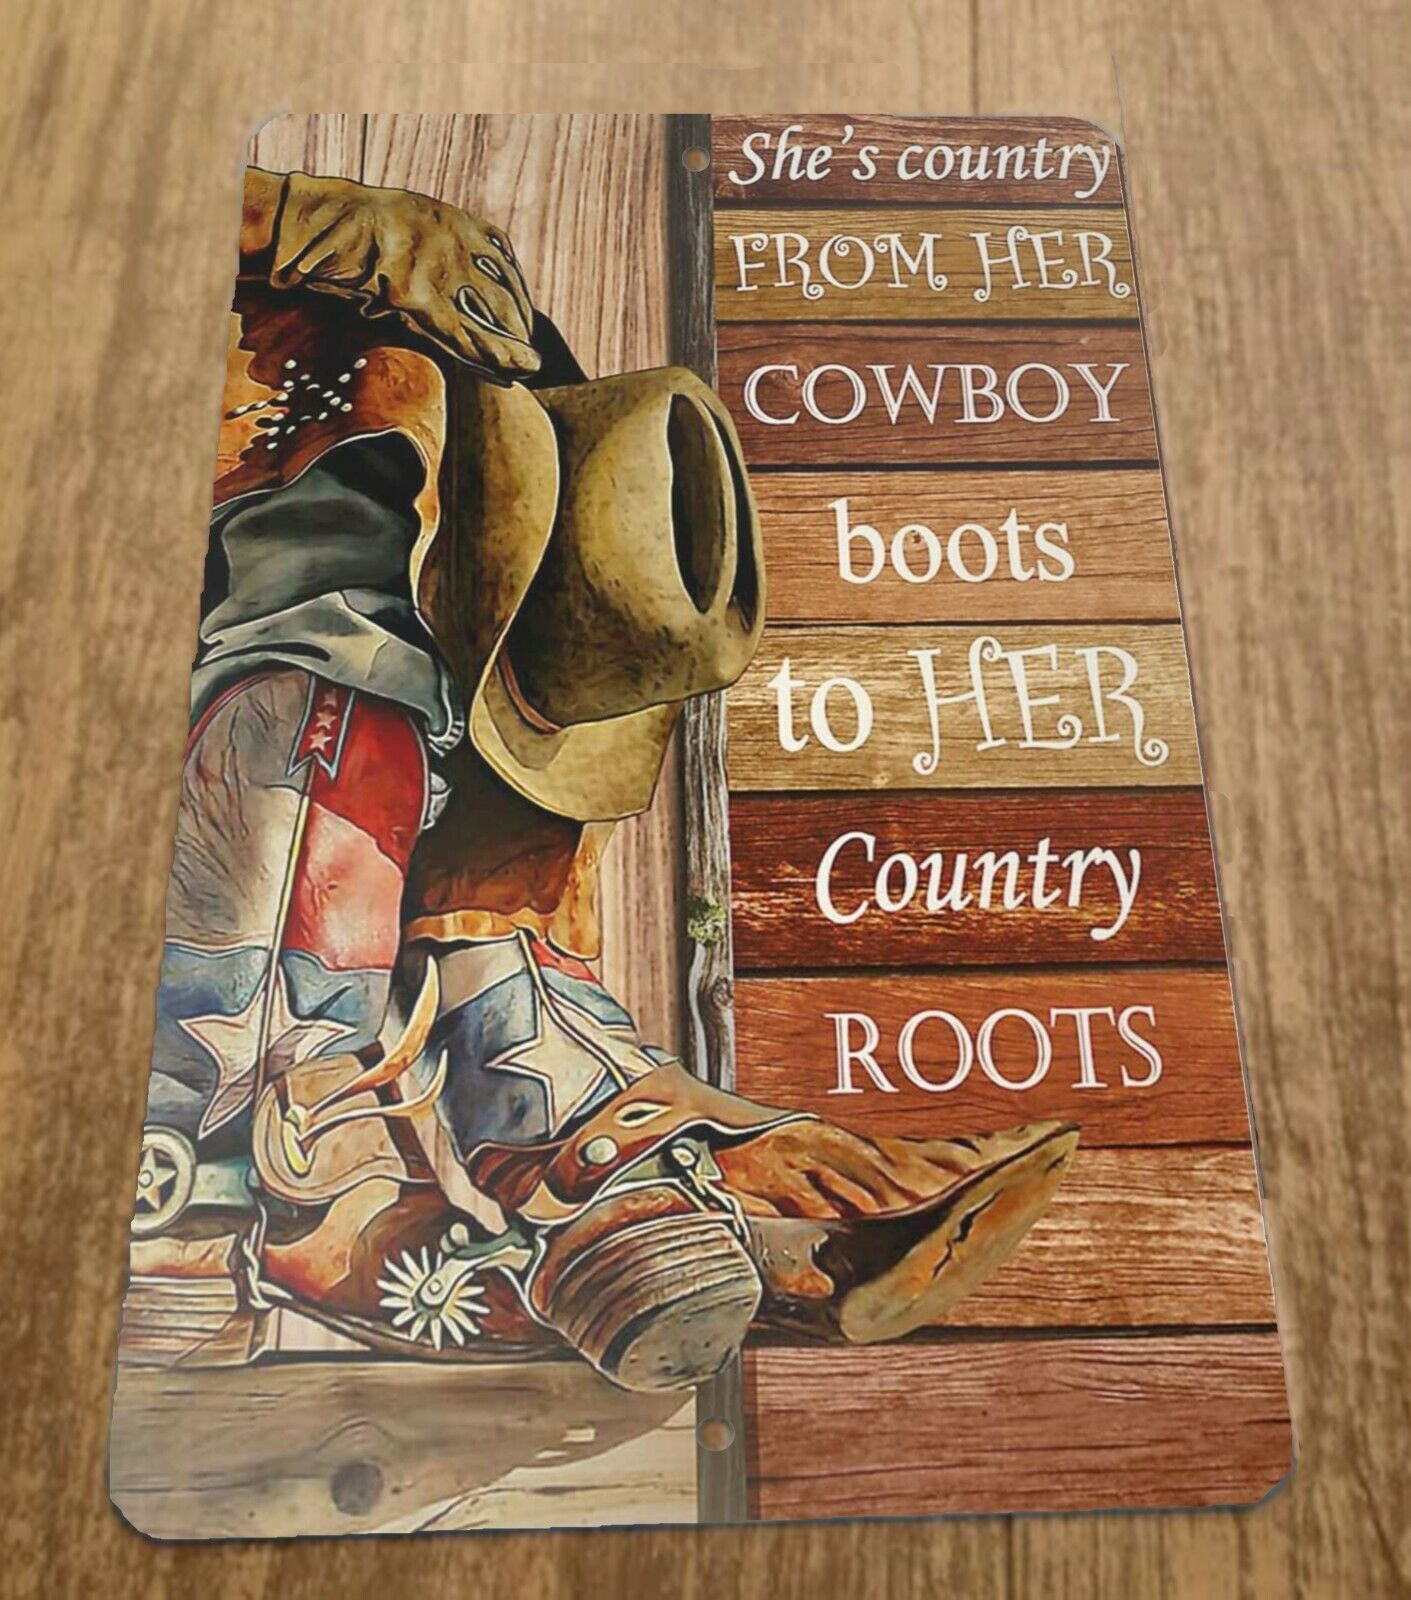 Shes Country From Her Cowboy Boots To Her Country Roots 8x12 Metal Wall Sign Western Misc Poster